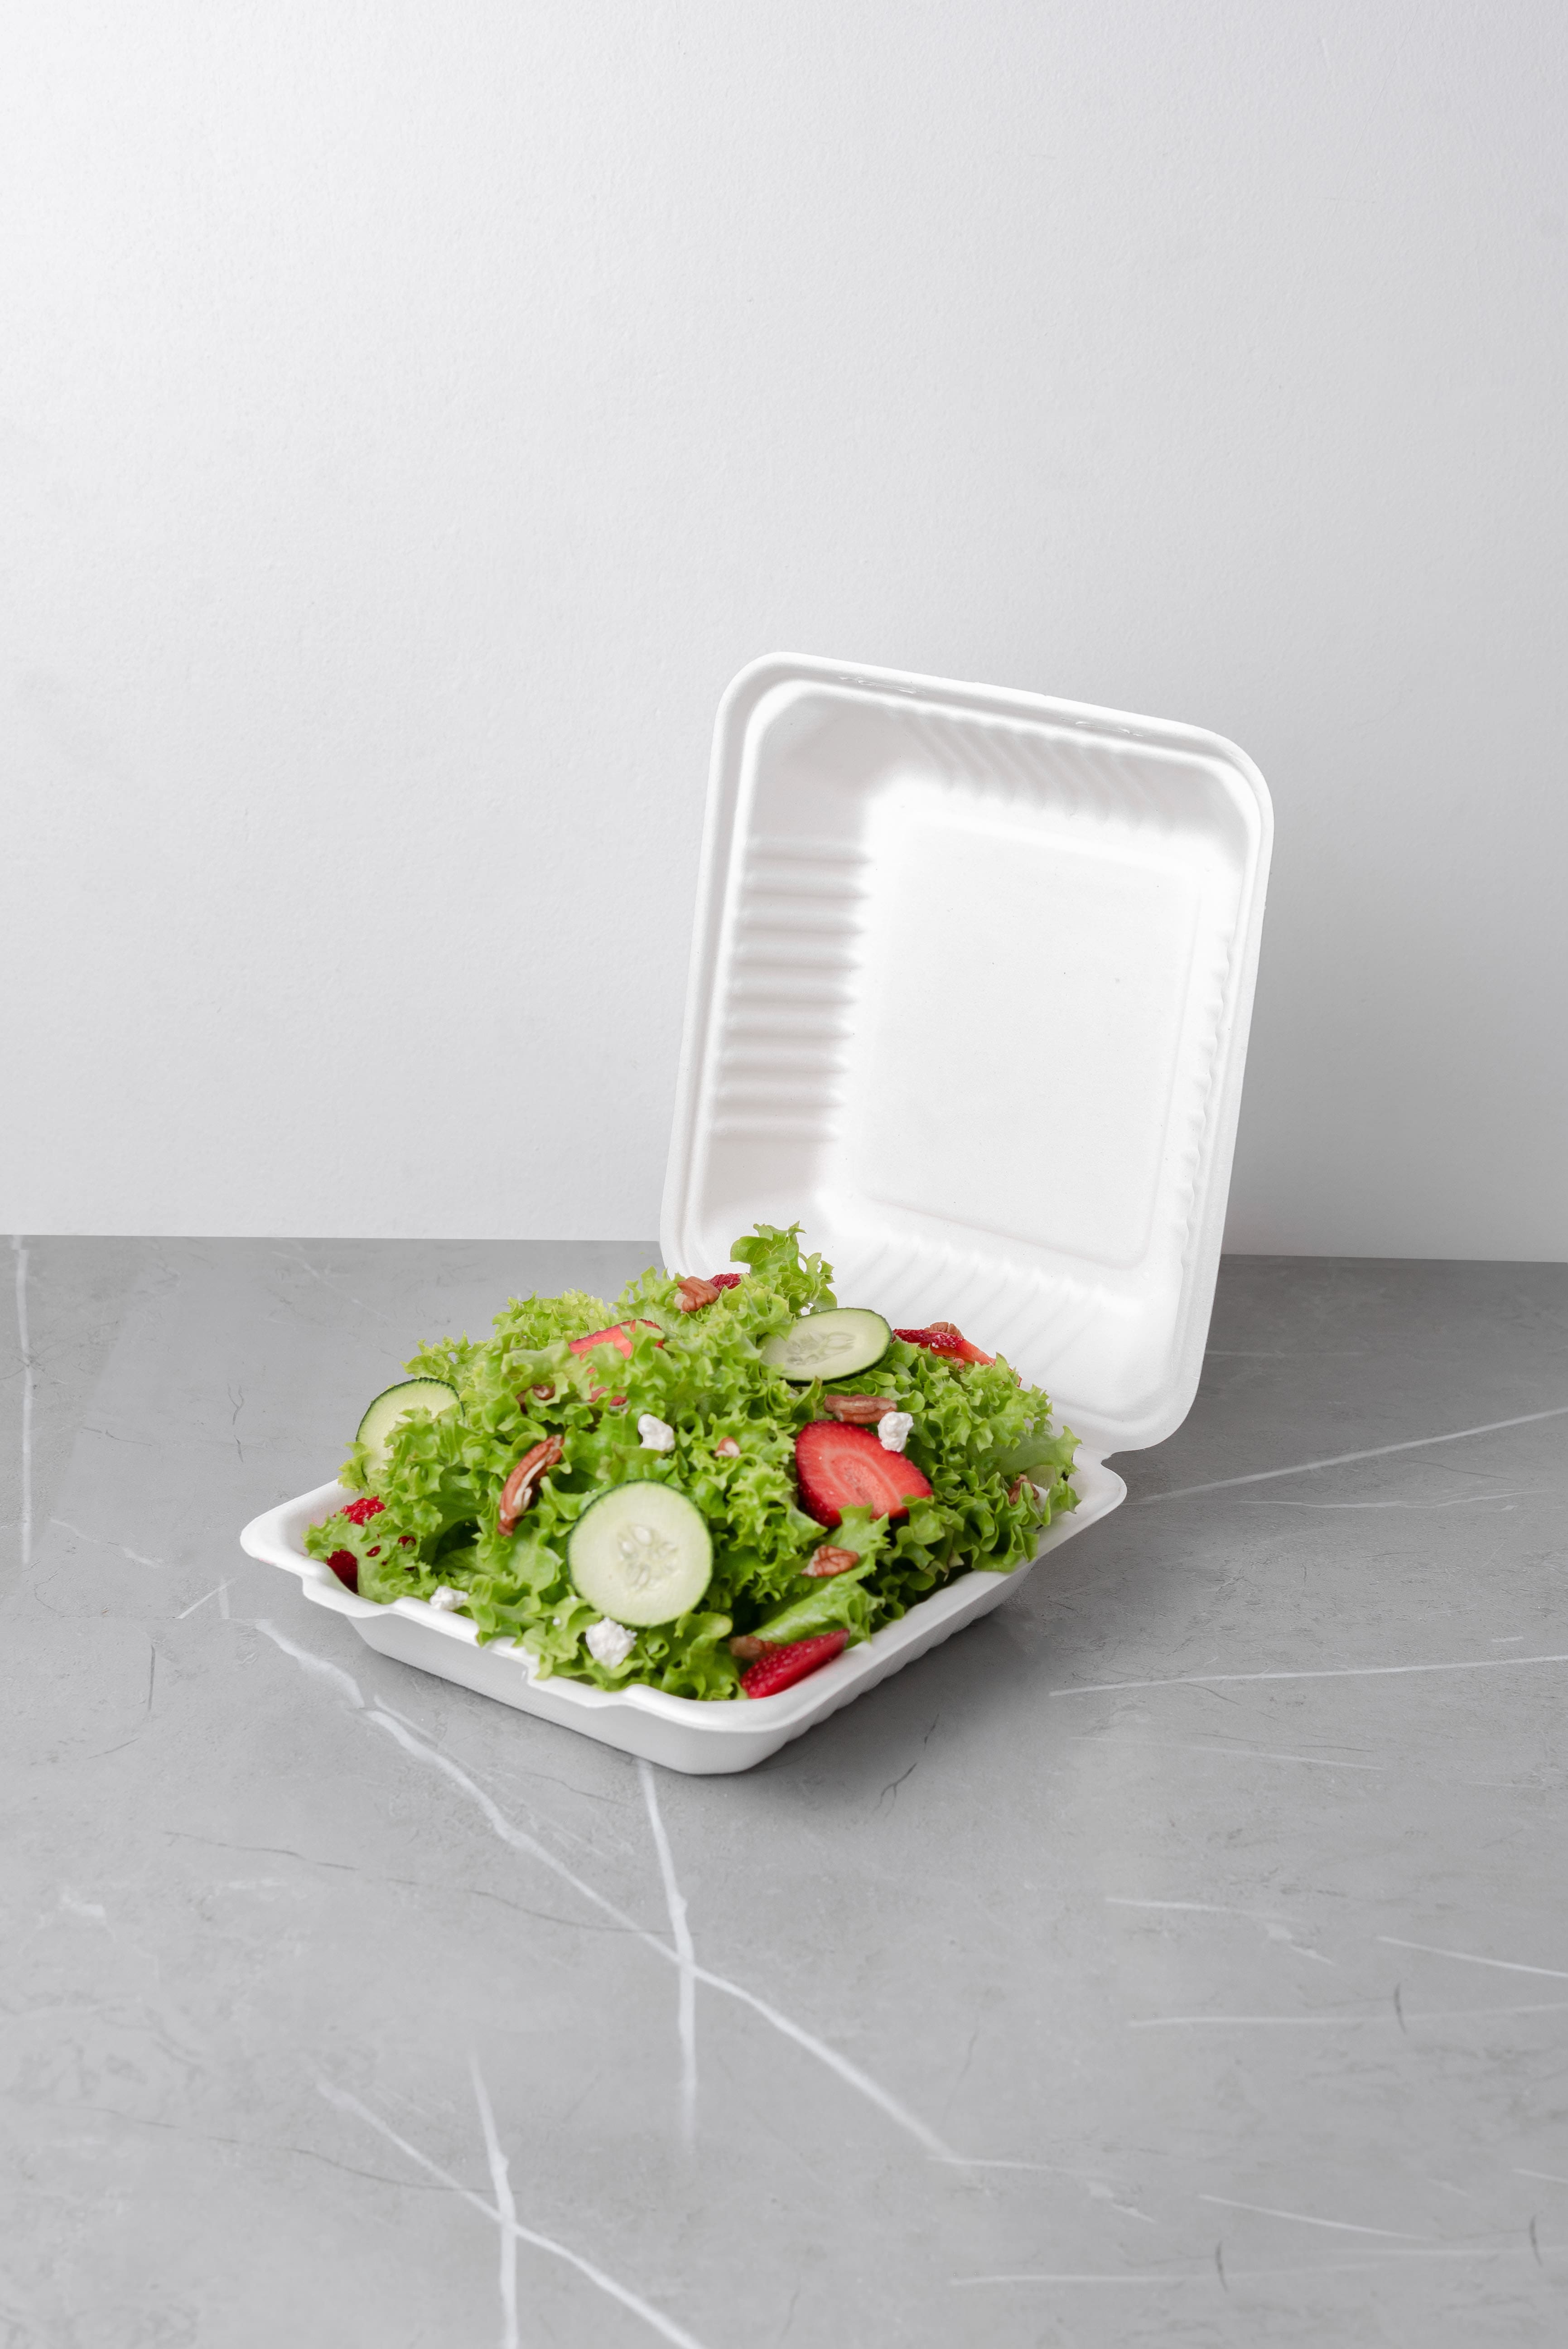 Compostable 9x9x3 3 Compartment Clamshell To Go Containers 200